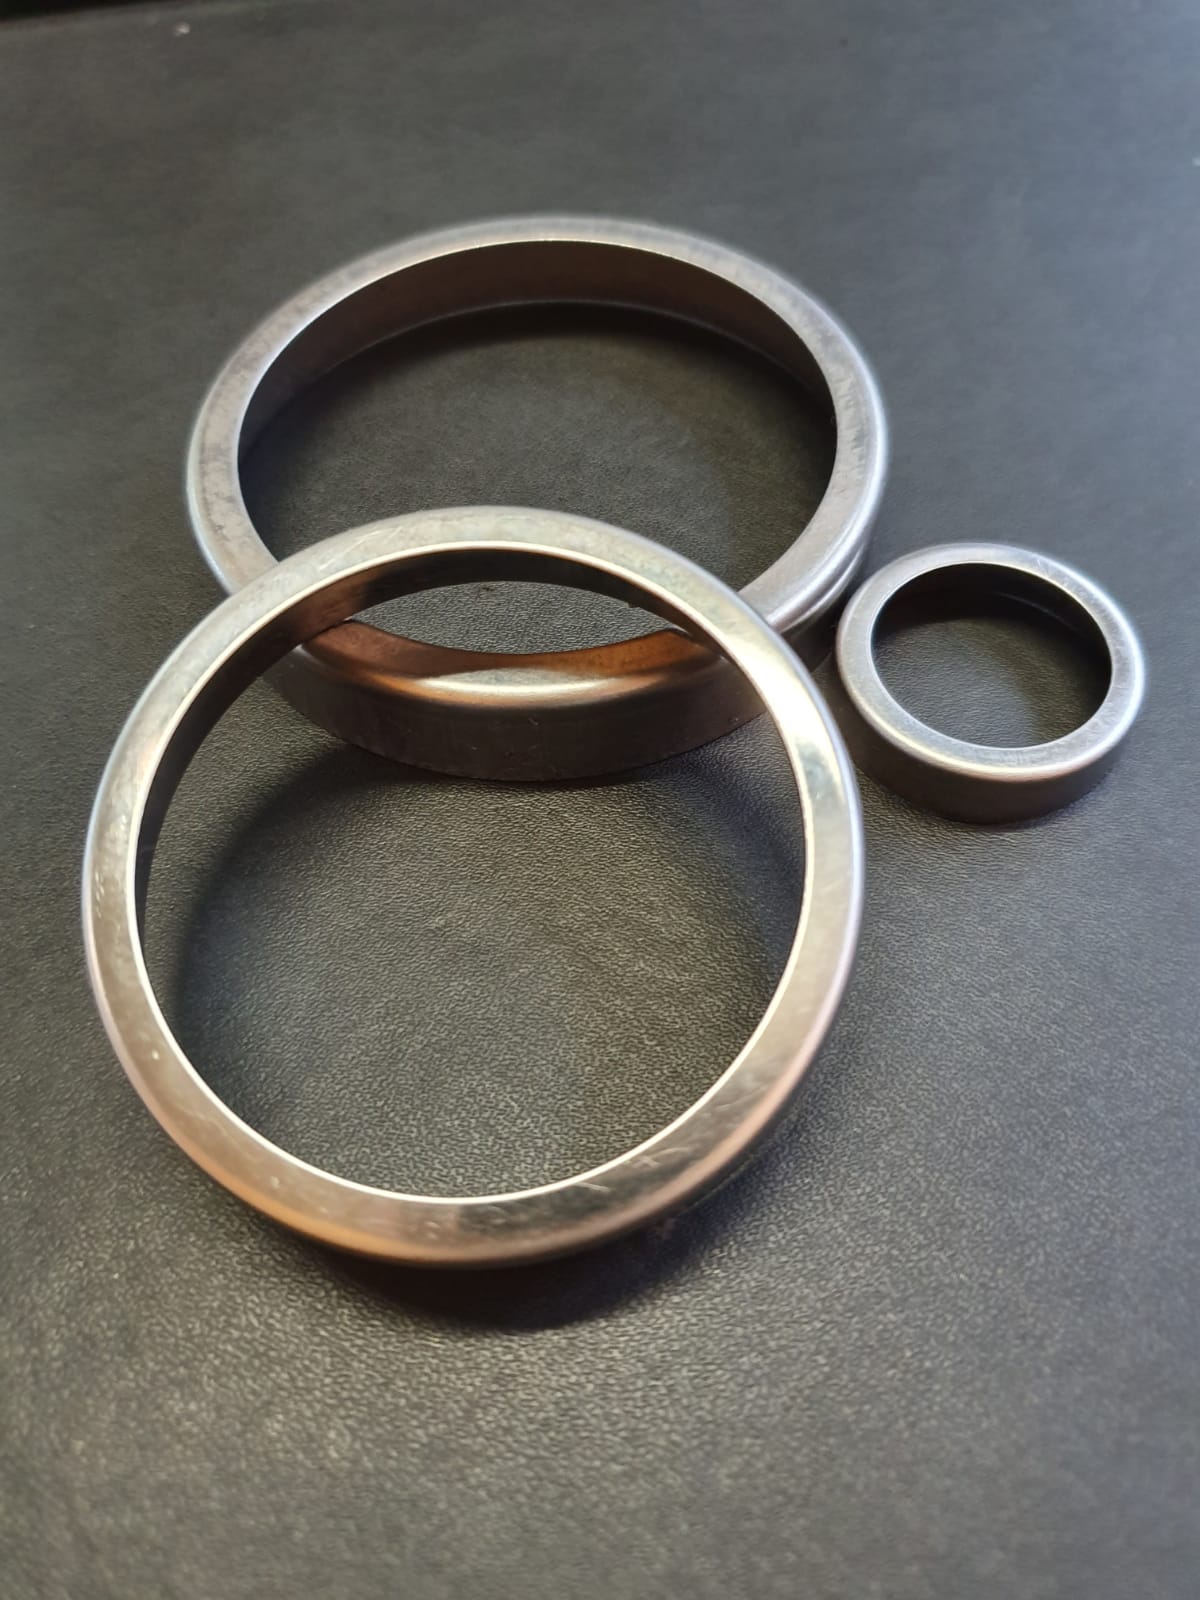 We provide different reinforcement rings from 25 to 75 diameter